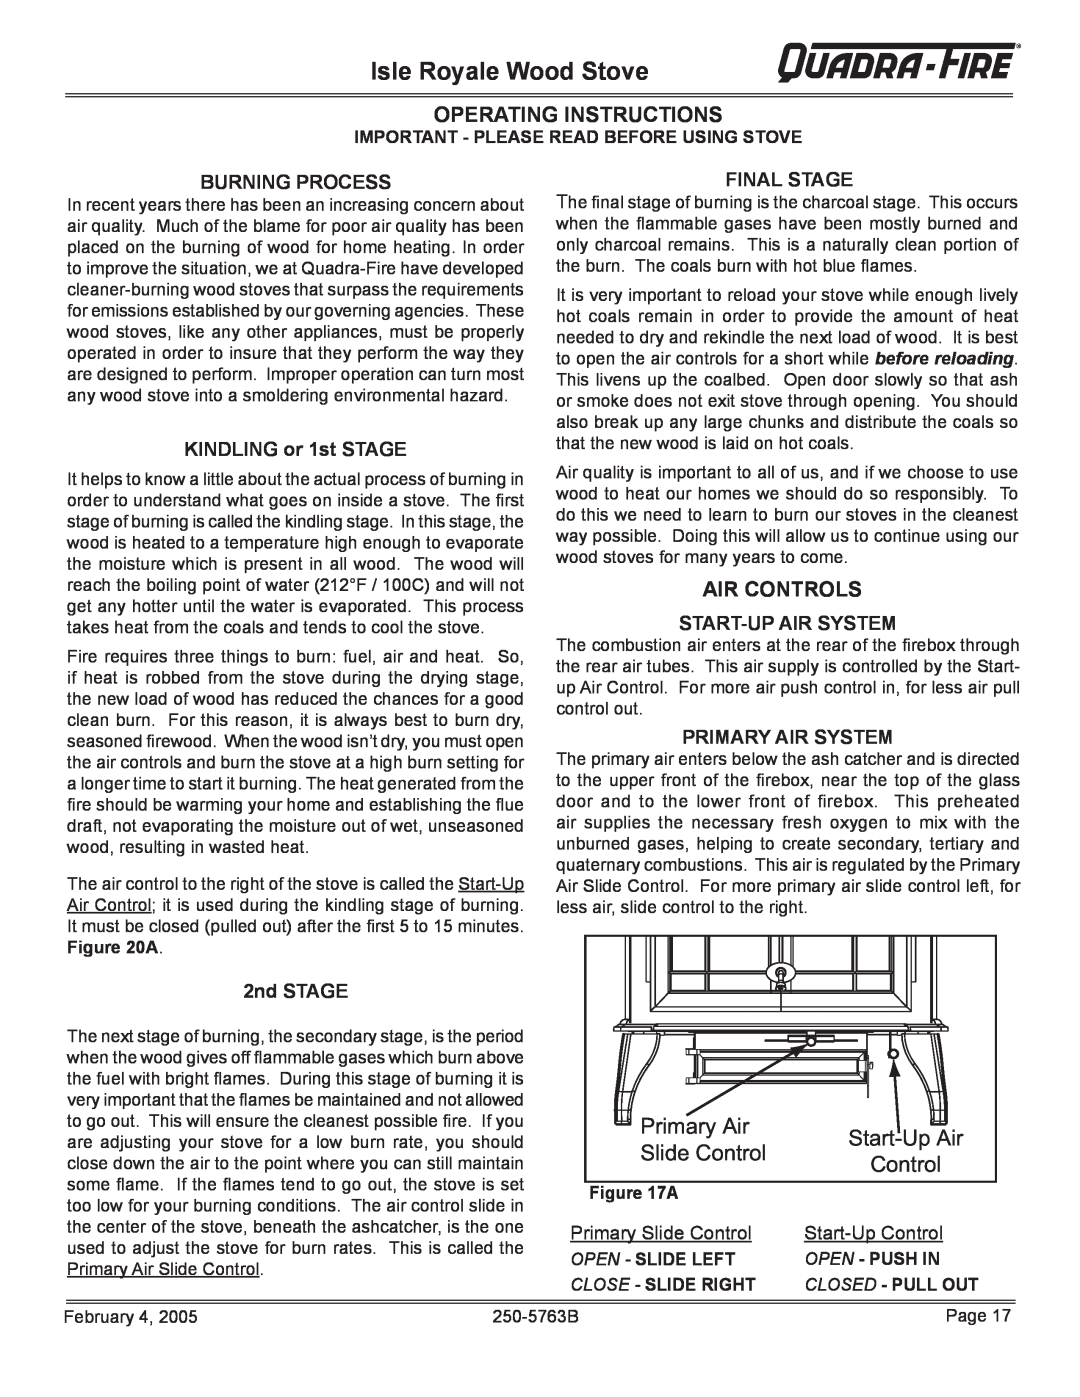 Quadra-Fire Operating Instructions, Air Controls, Isle Royale Wood Stove, Primary Air, Start-UpAir, Slide Control 